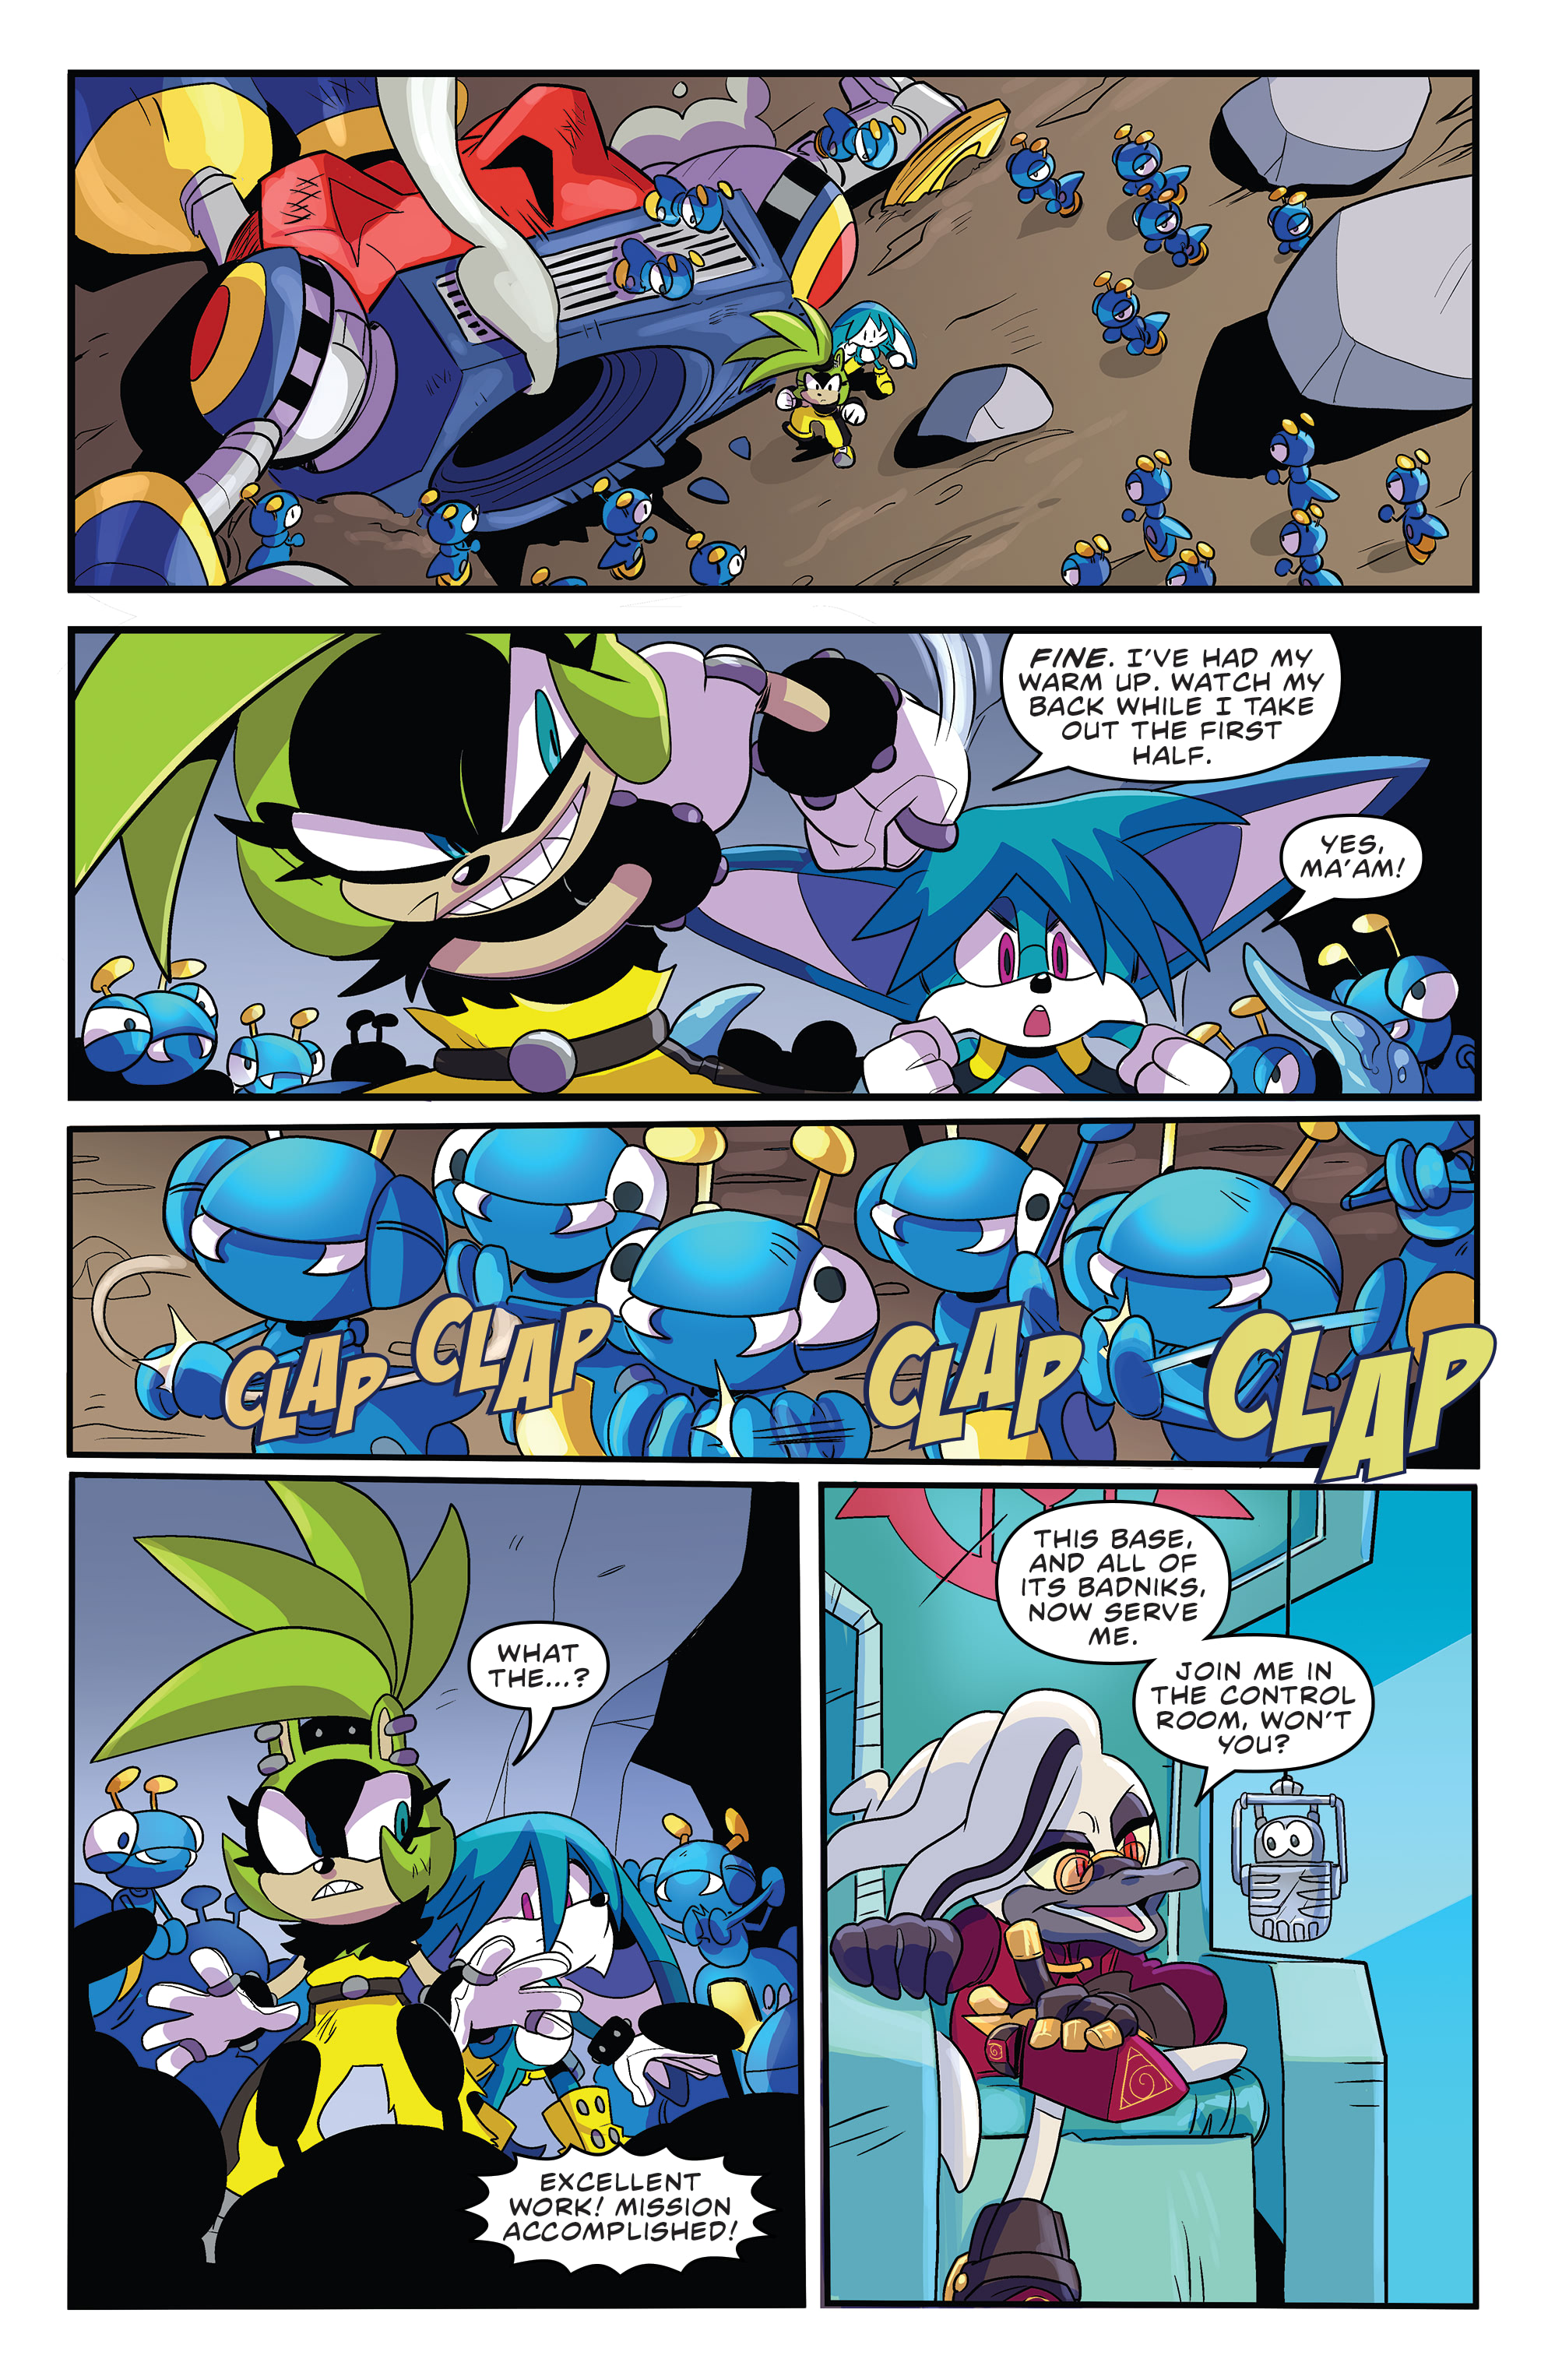 Sonic The Hedgehog Imposter Syndrome 2021 Chapter 2 Page 9 